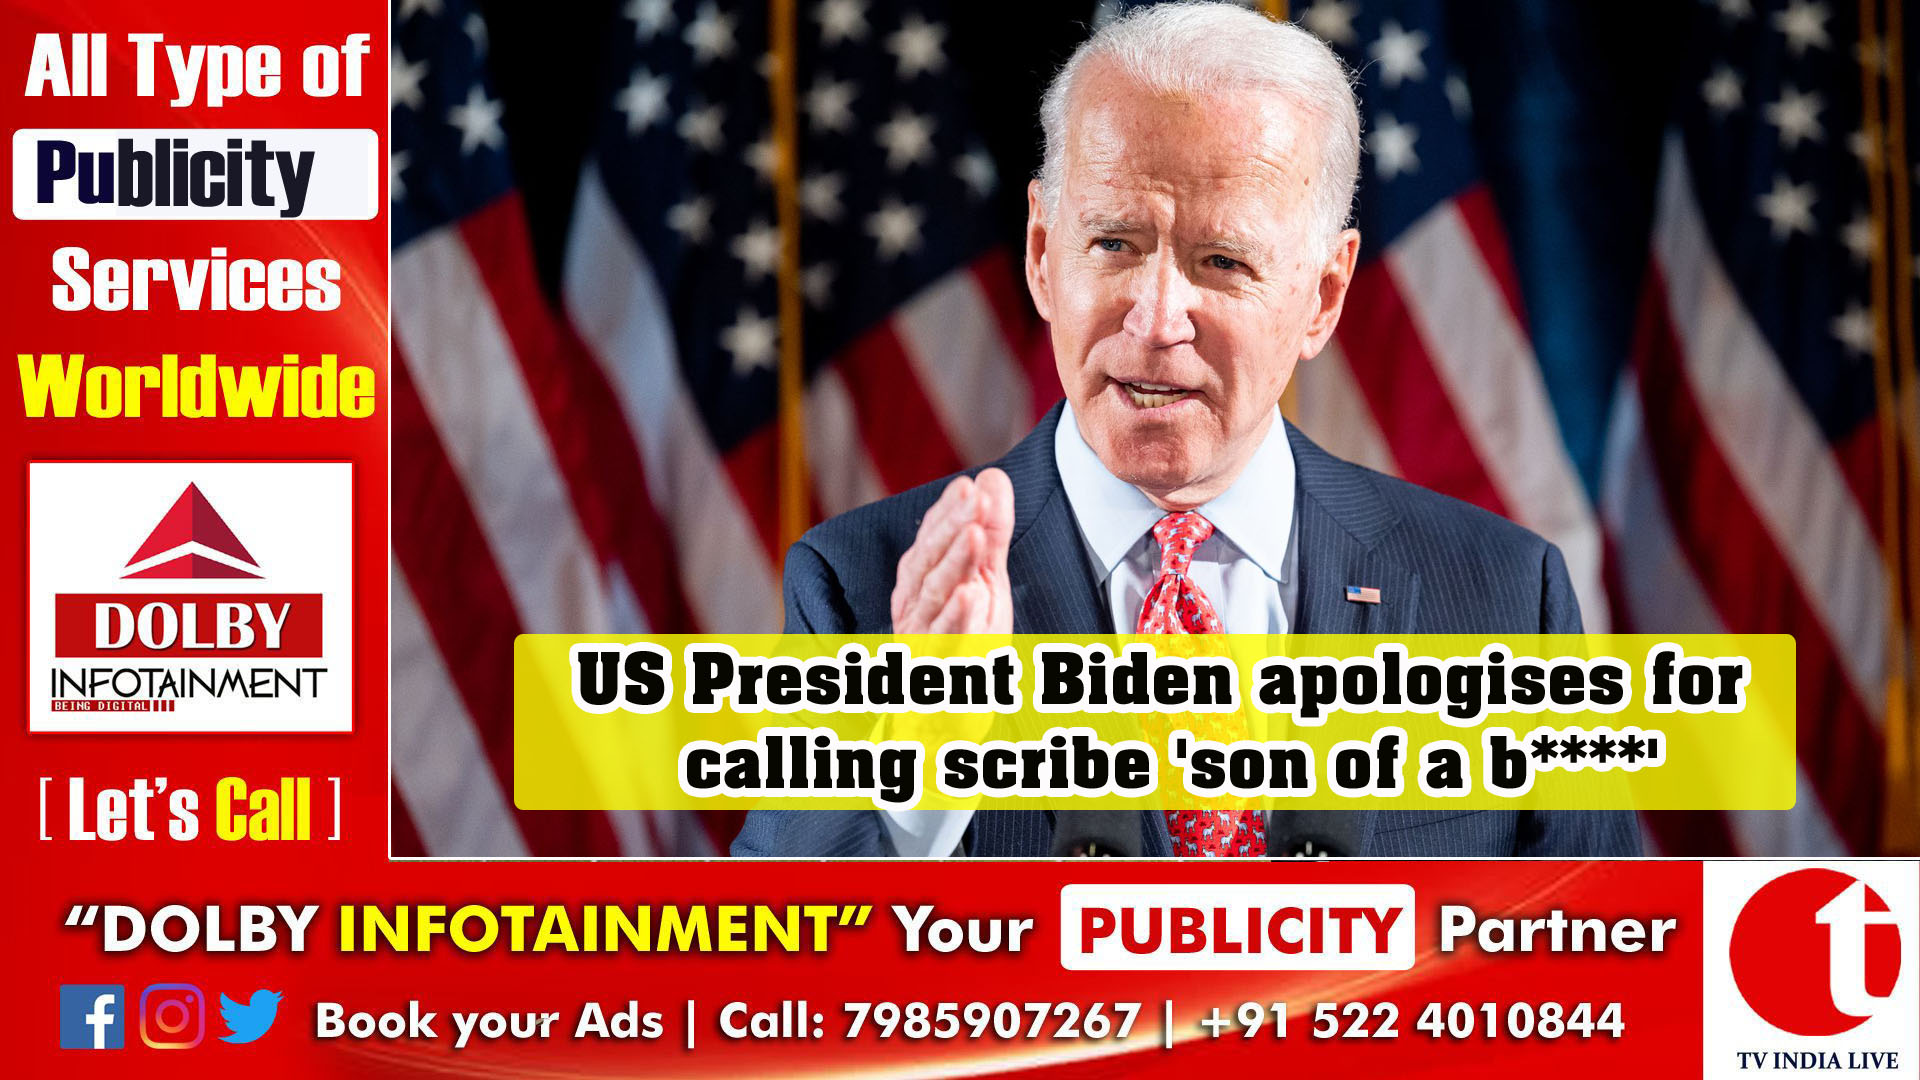 US President Biden apologises for calling scribe 'son of a b****'